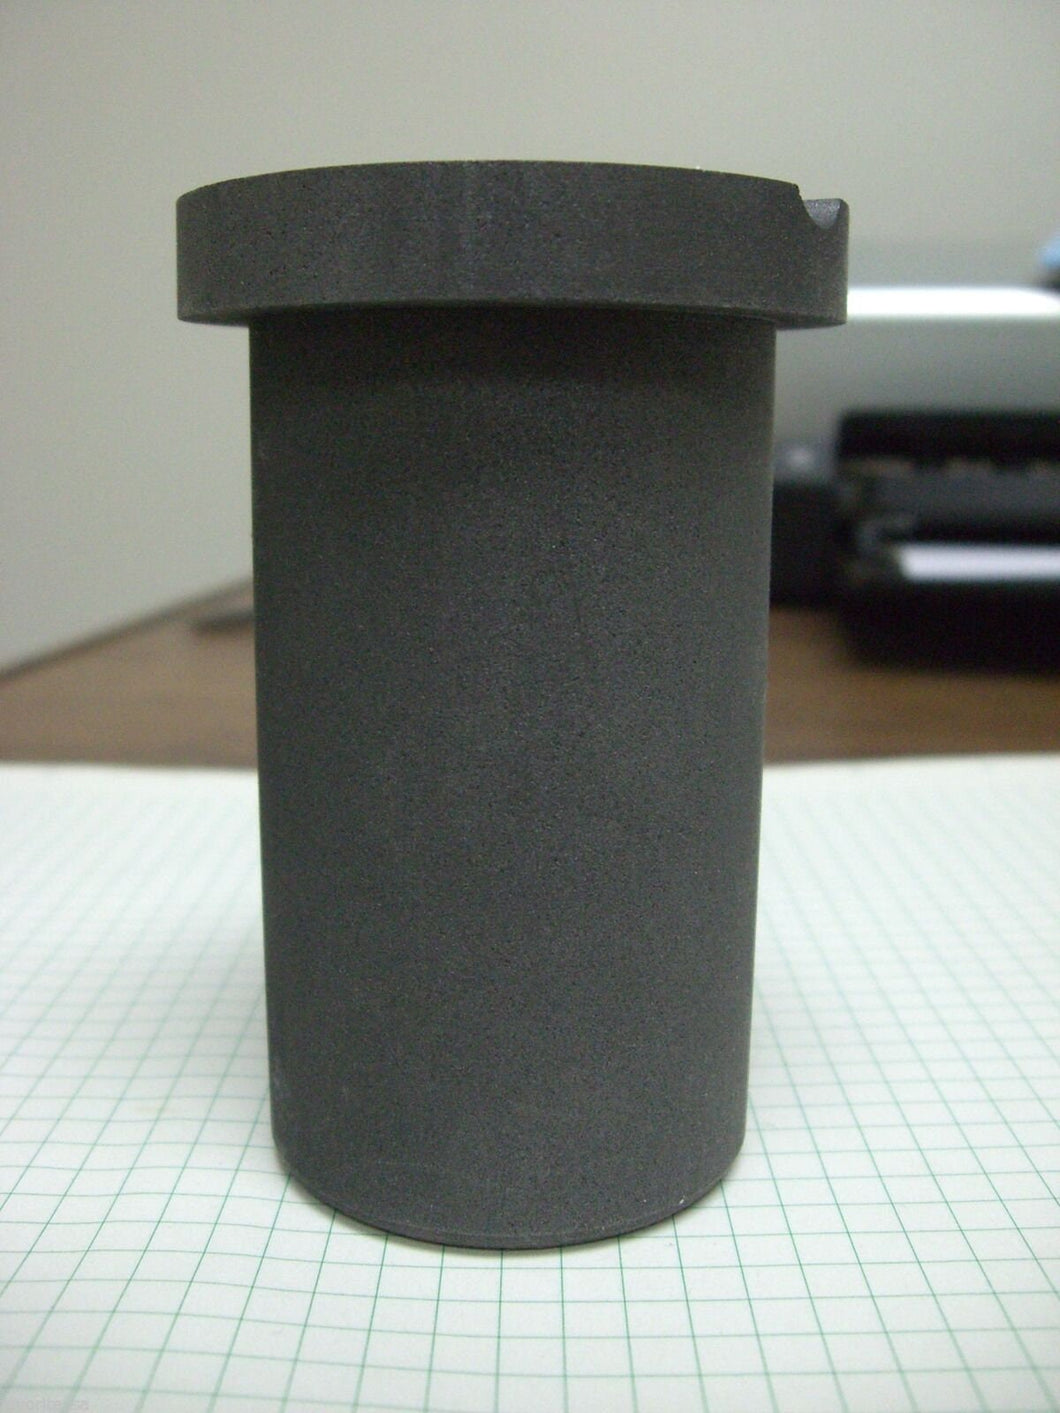 GRAPHITE CRUCIBLE FOR Melting Gold Silver 1kg Capacity-Used For Induction Melt